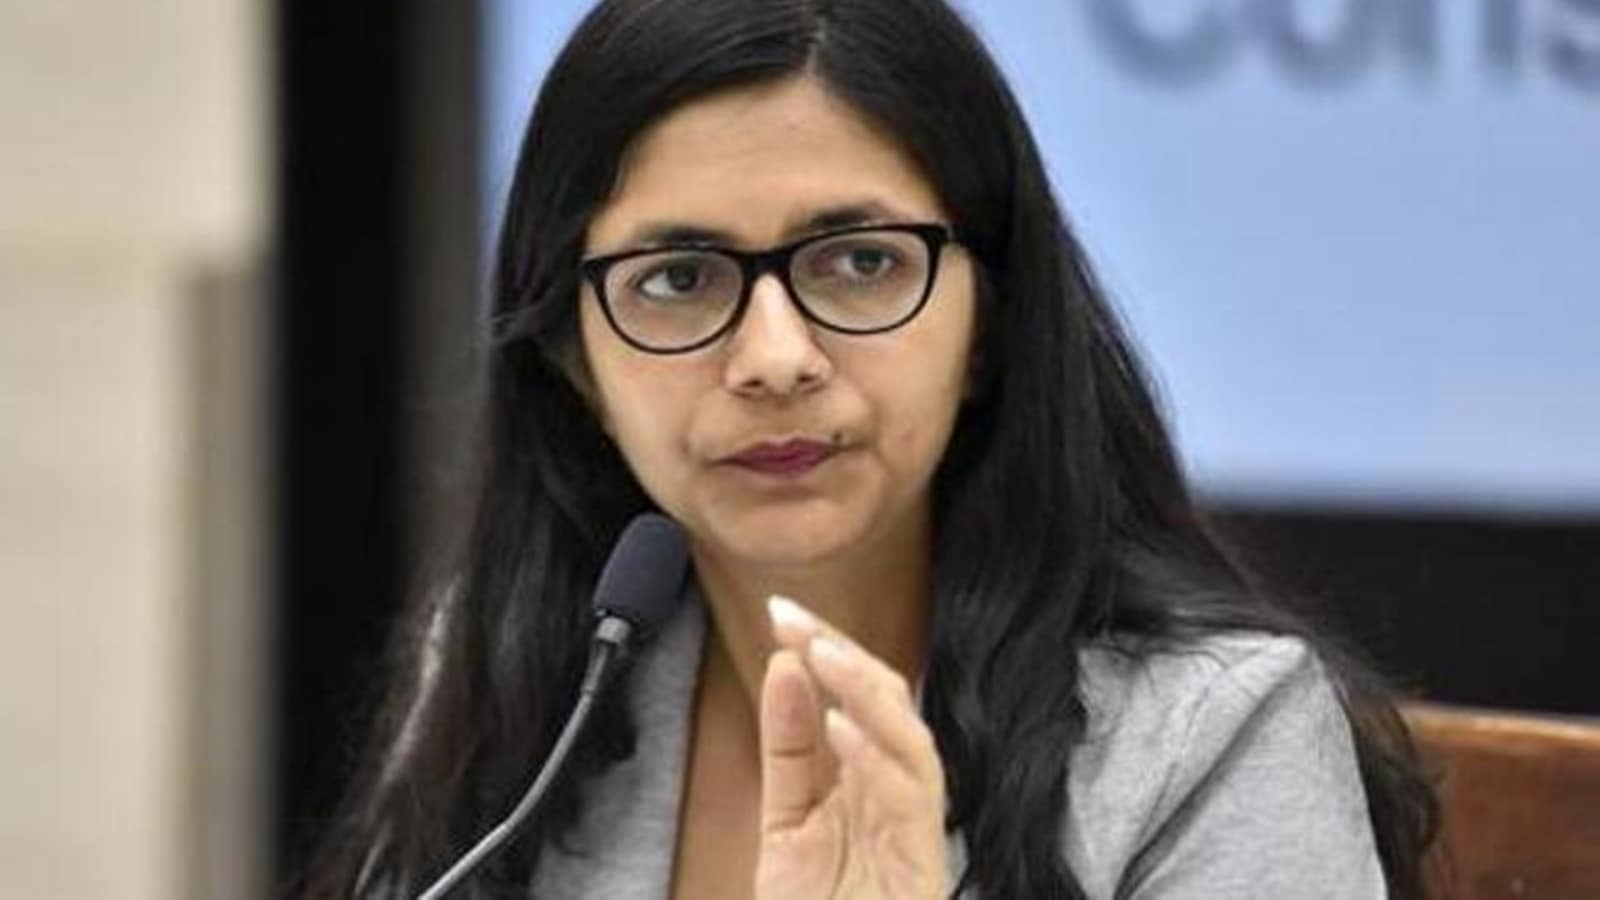 Indore Ka Rape Porn - DCW chief writes to Twitter, Delhi Police on child porn clips 'sold for  â‚¹20' | Latest News India - Hindustan Times